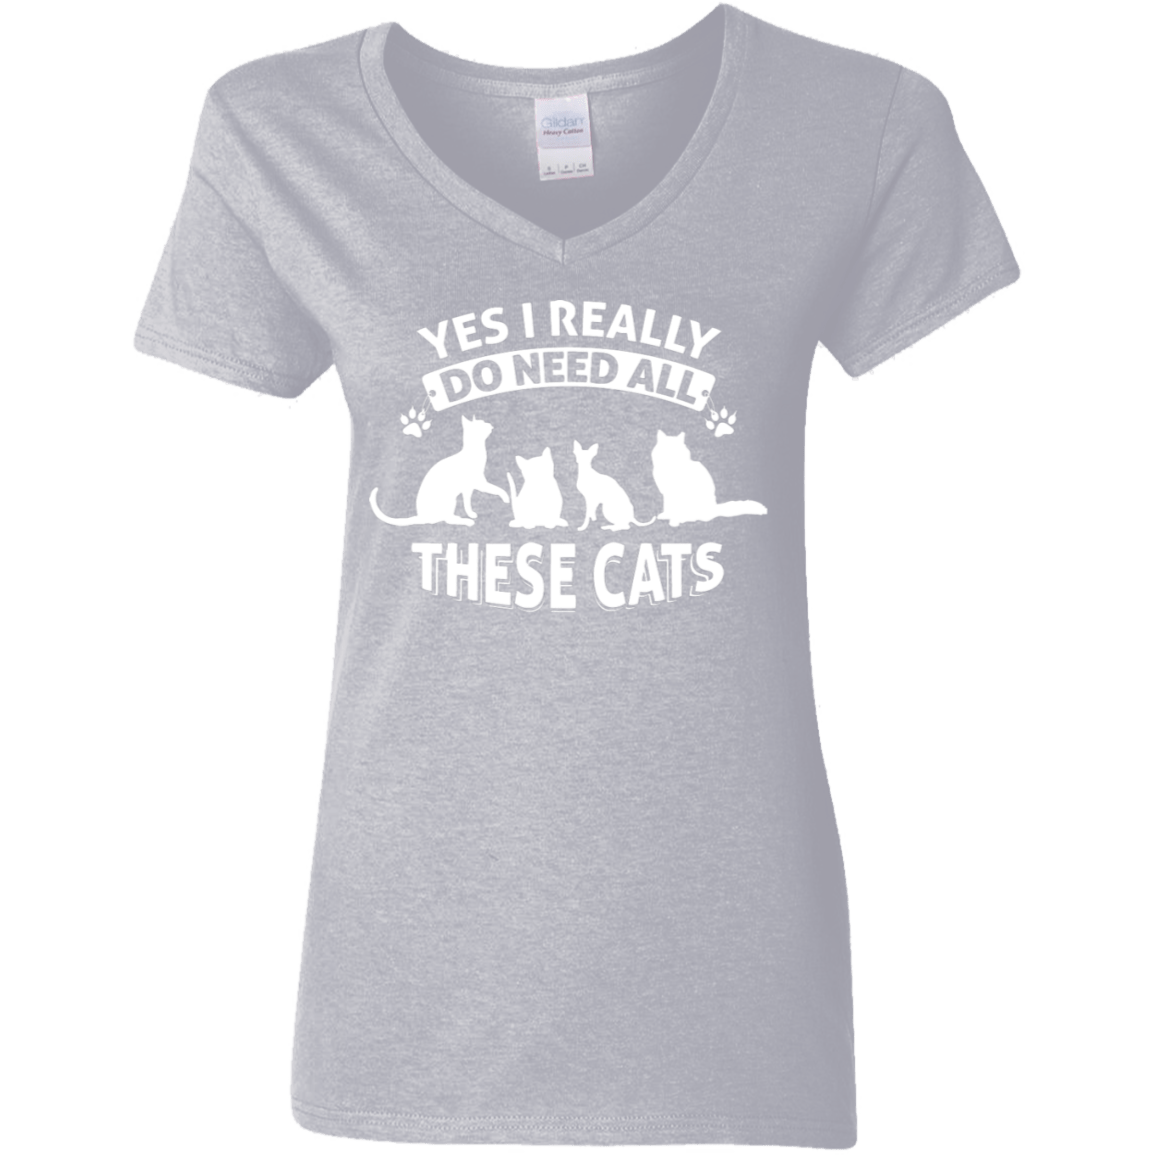 Yes I Need All These Cats - Ladies V Neck.